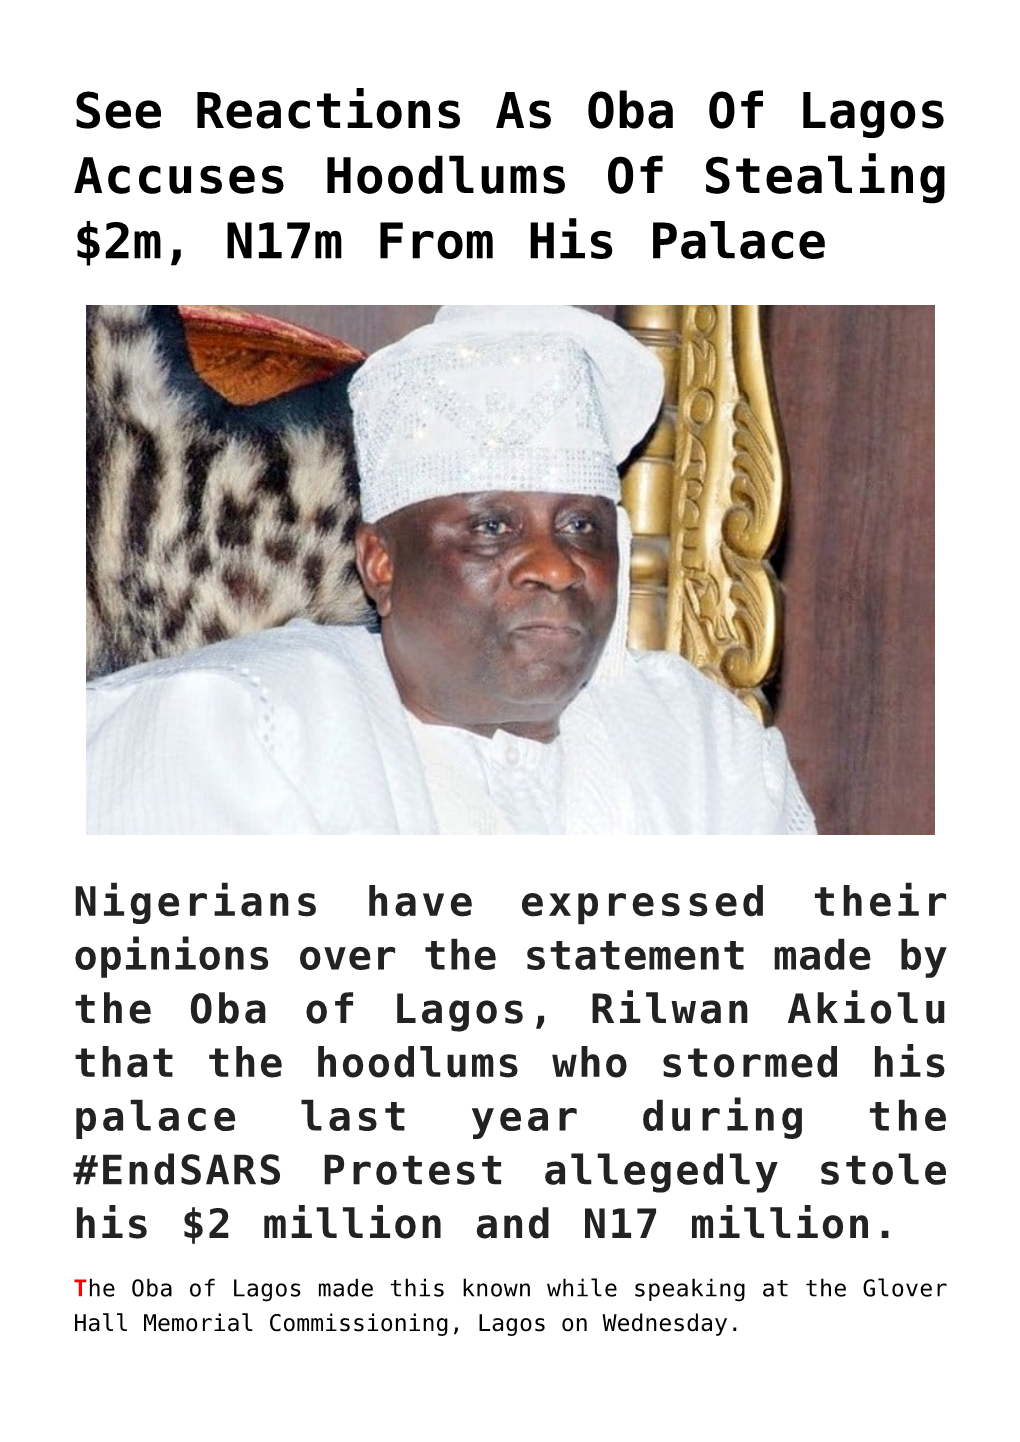 See Reactions As Oba of Lagos Accuses Hoodlums of Stealing $2M, N17m from His Palace